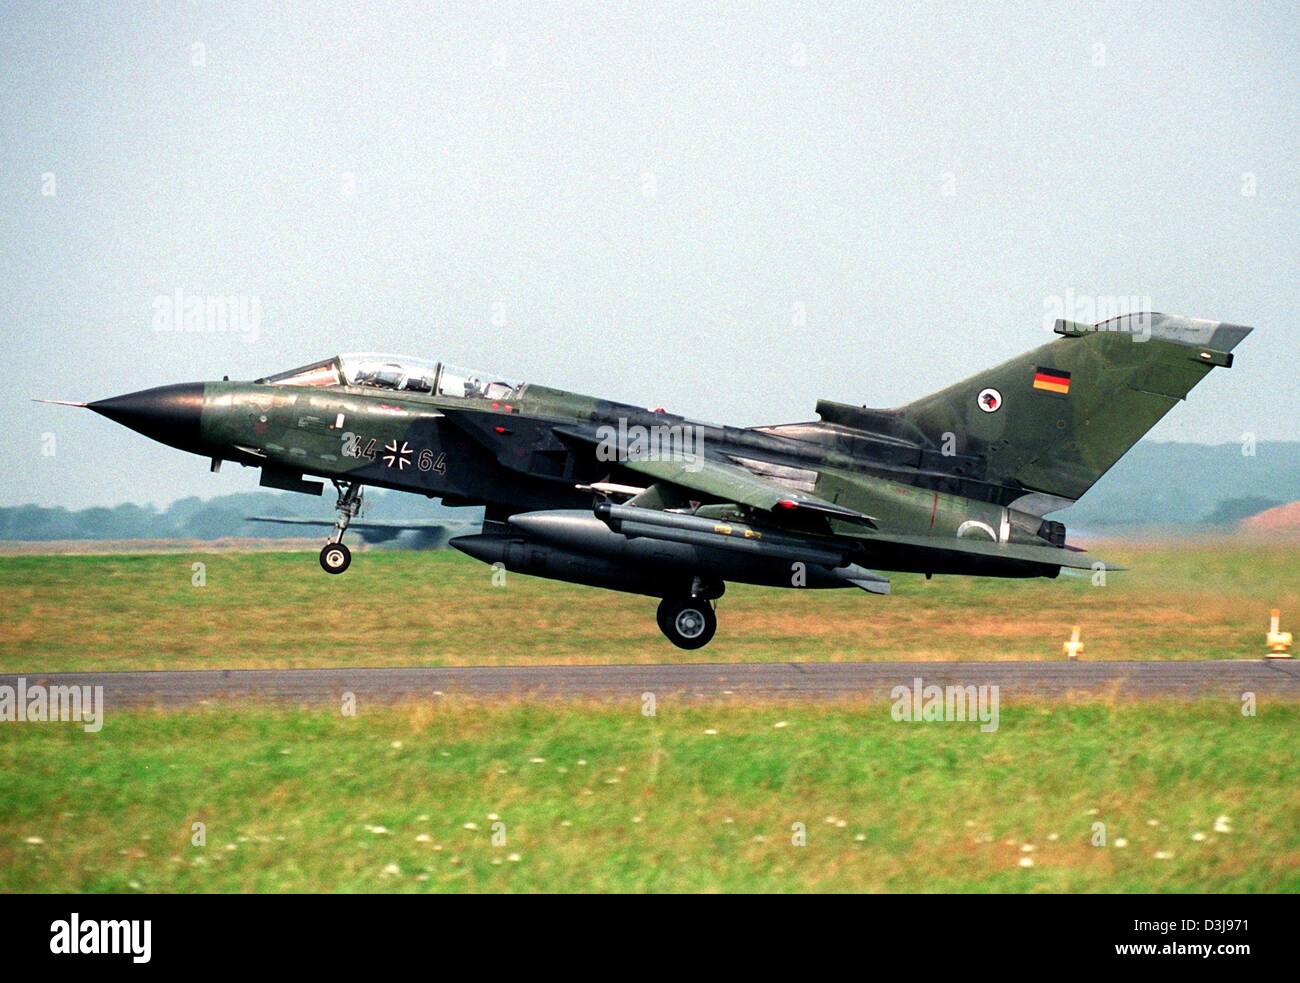 (dpa files) - A Tornado fighter jet of the 51st reconnaissance squadron 'Immelmann' of the German Bundeswehr lifts off from the airbase in Jagel, Germany, 21 July 1995. Two jets from the 51st reconnaissance squadron collided in mid-air earlier on Wednesday, 21 April 2004, near the town of Garding, northern Germany. Two crew members were killed in the crash but two others were able  Stock Photo